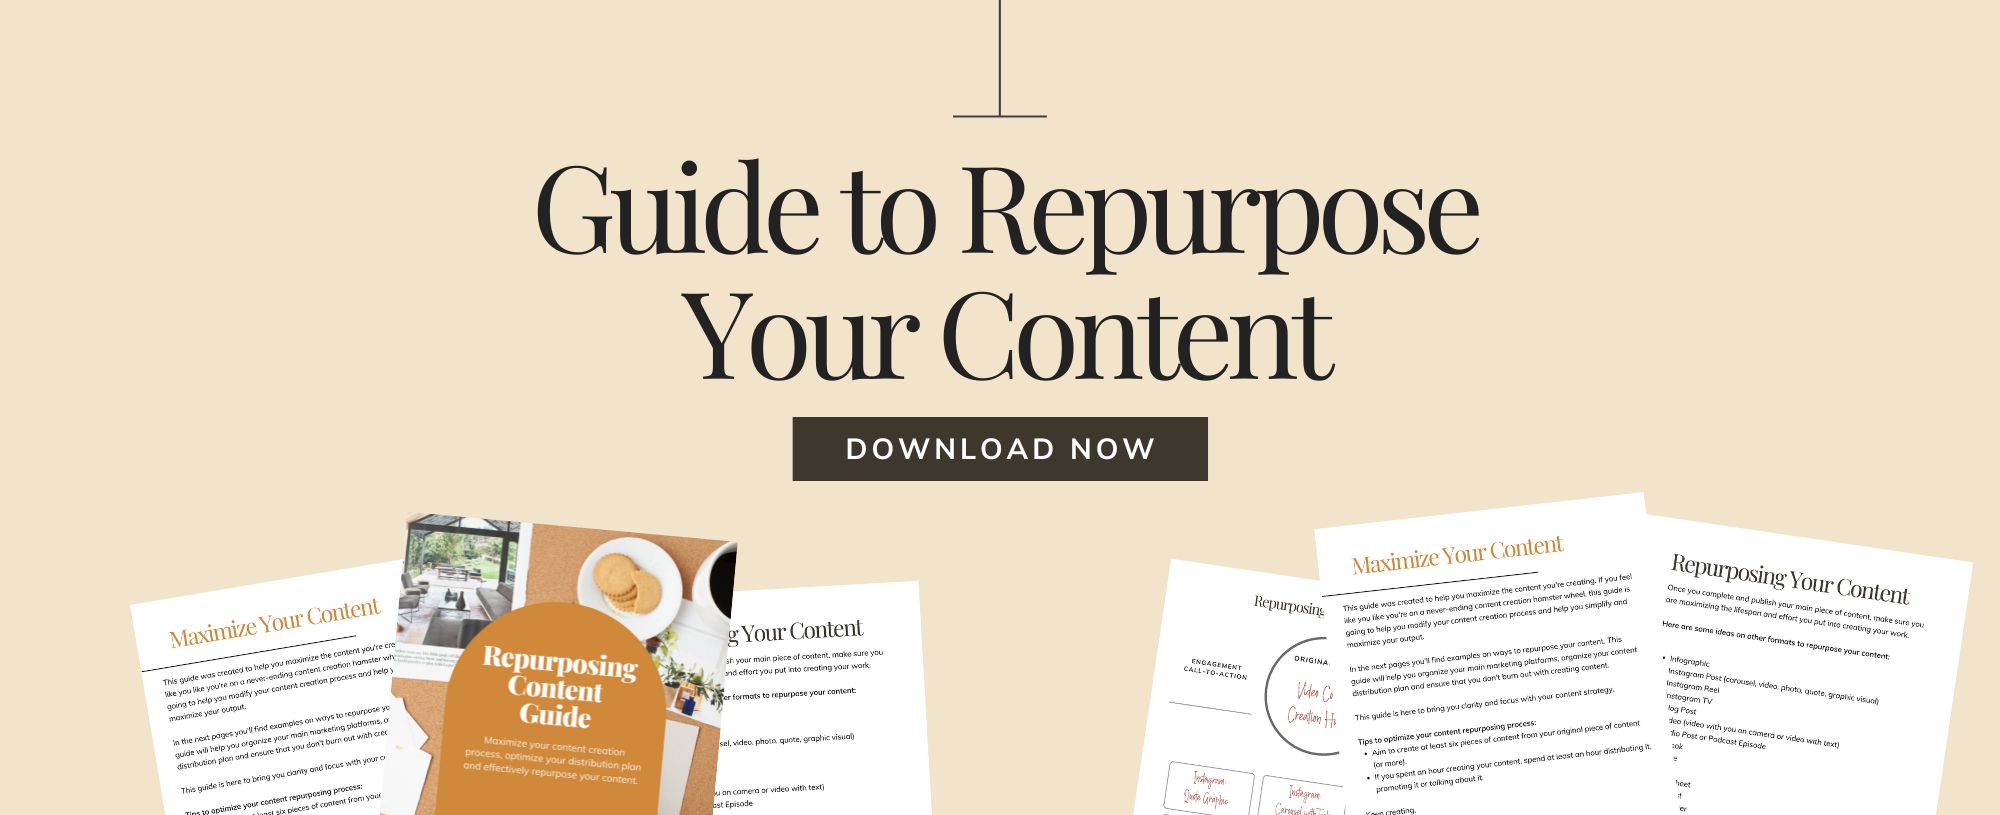 If you aren’t quite sure how to repurpose your content and how to maximize your channel distribution strategy, download my free guide.